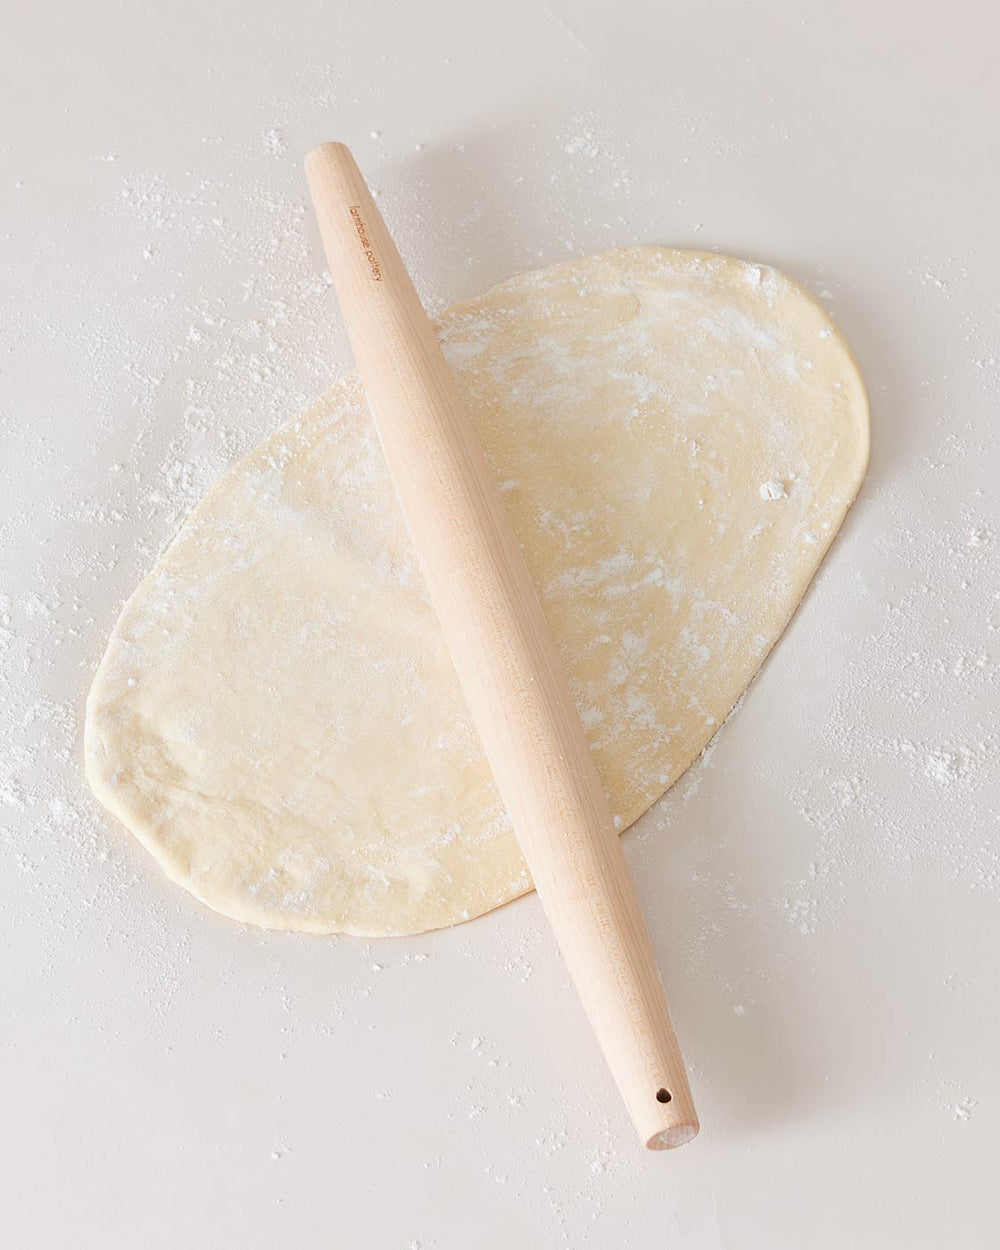 Maple French Rolling Pin